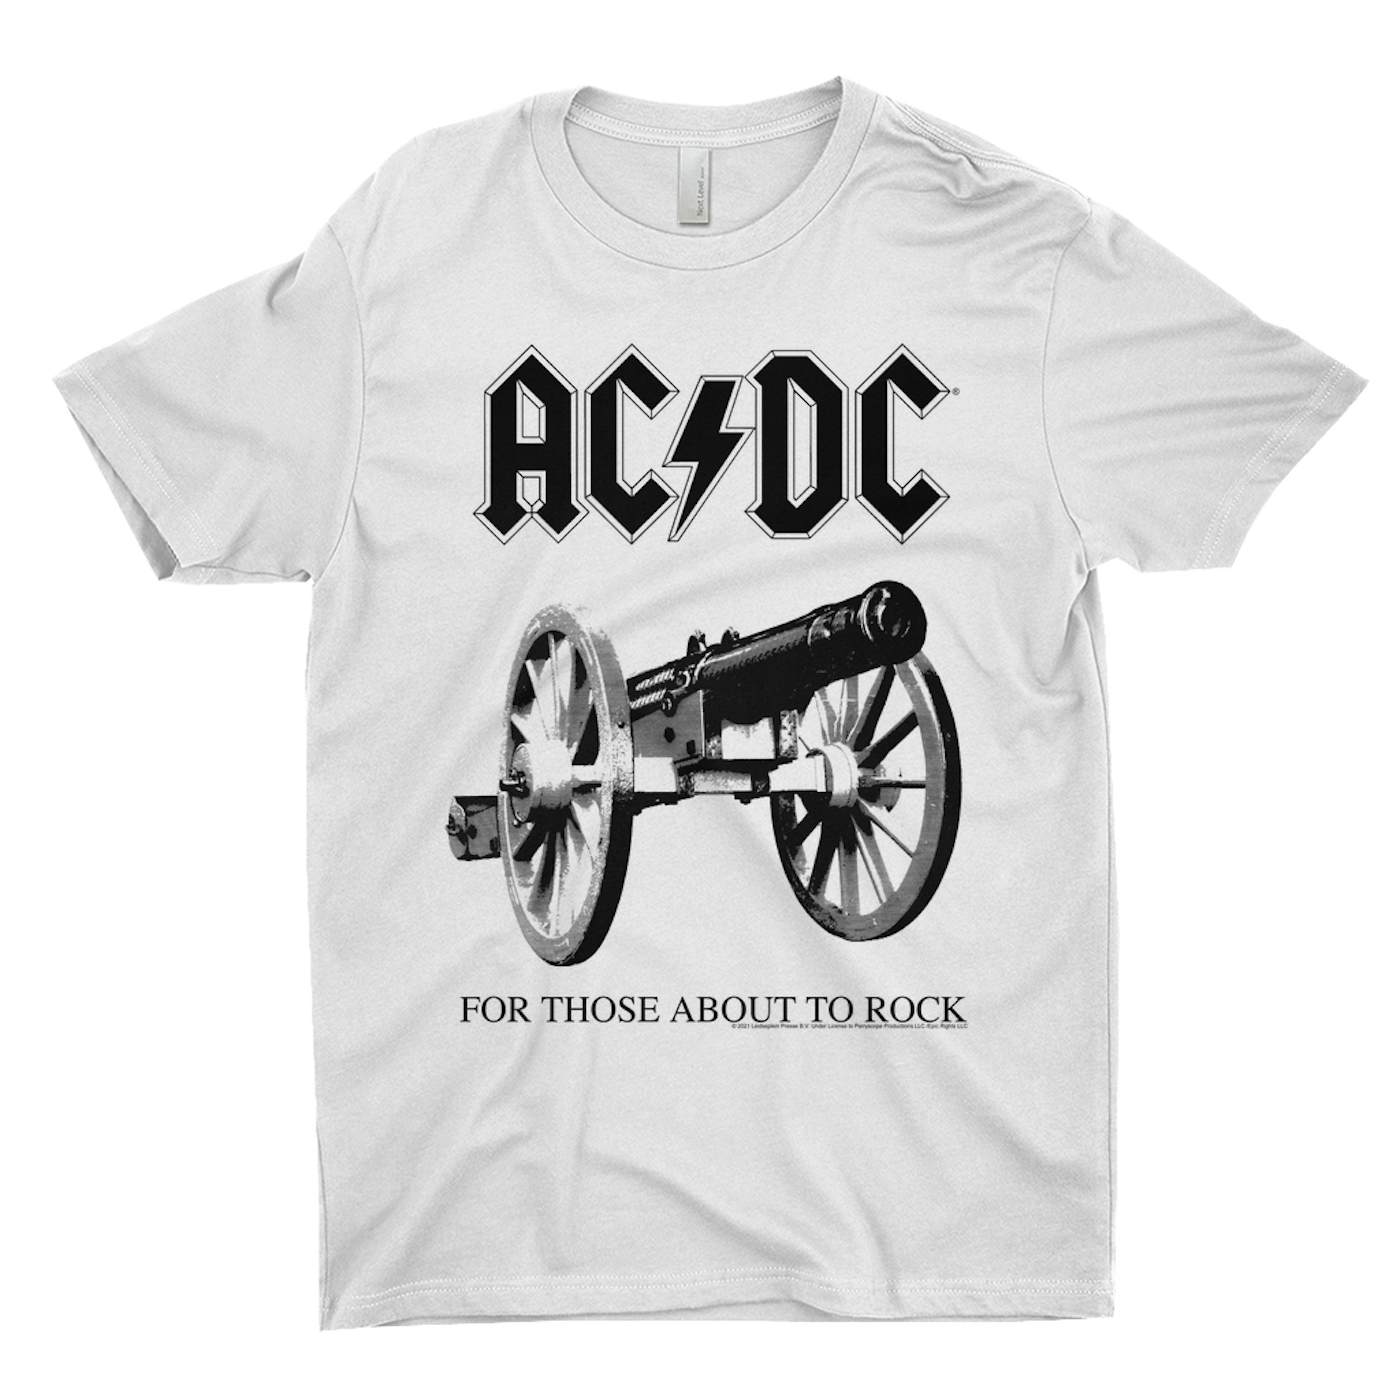 AC/DC T-Shirt | Shirt For Black Cannon About Those Rock To Image